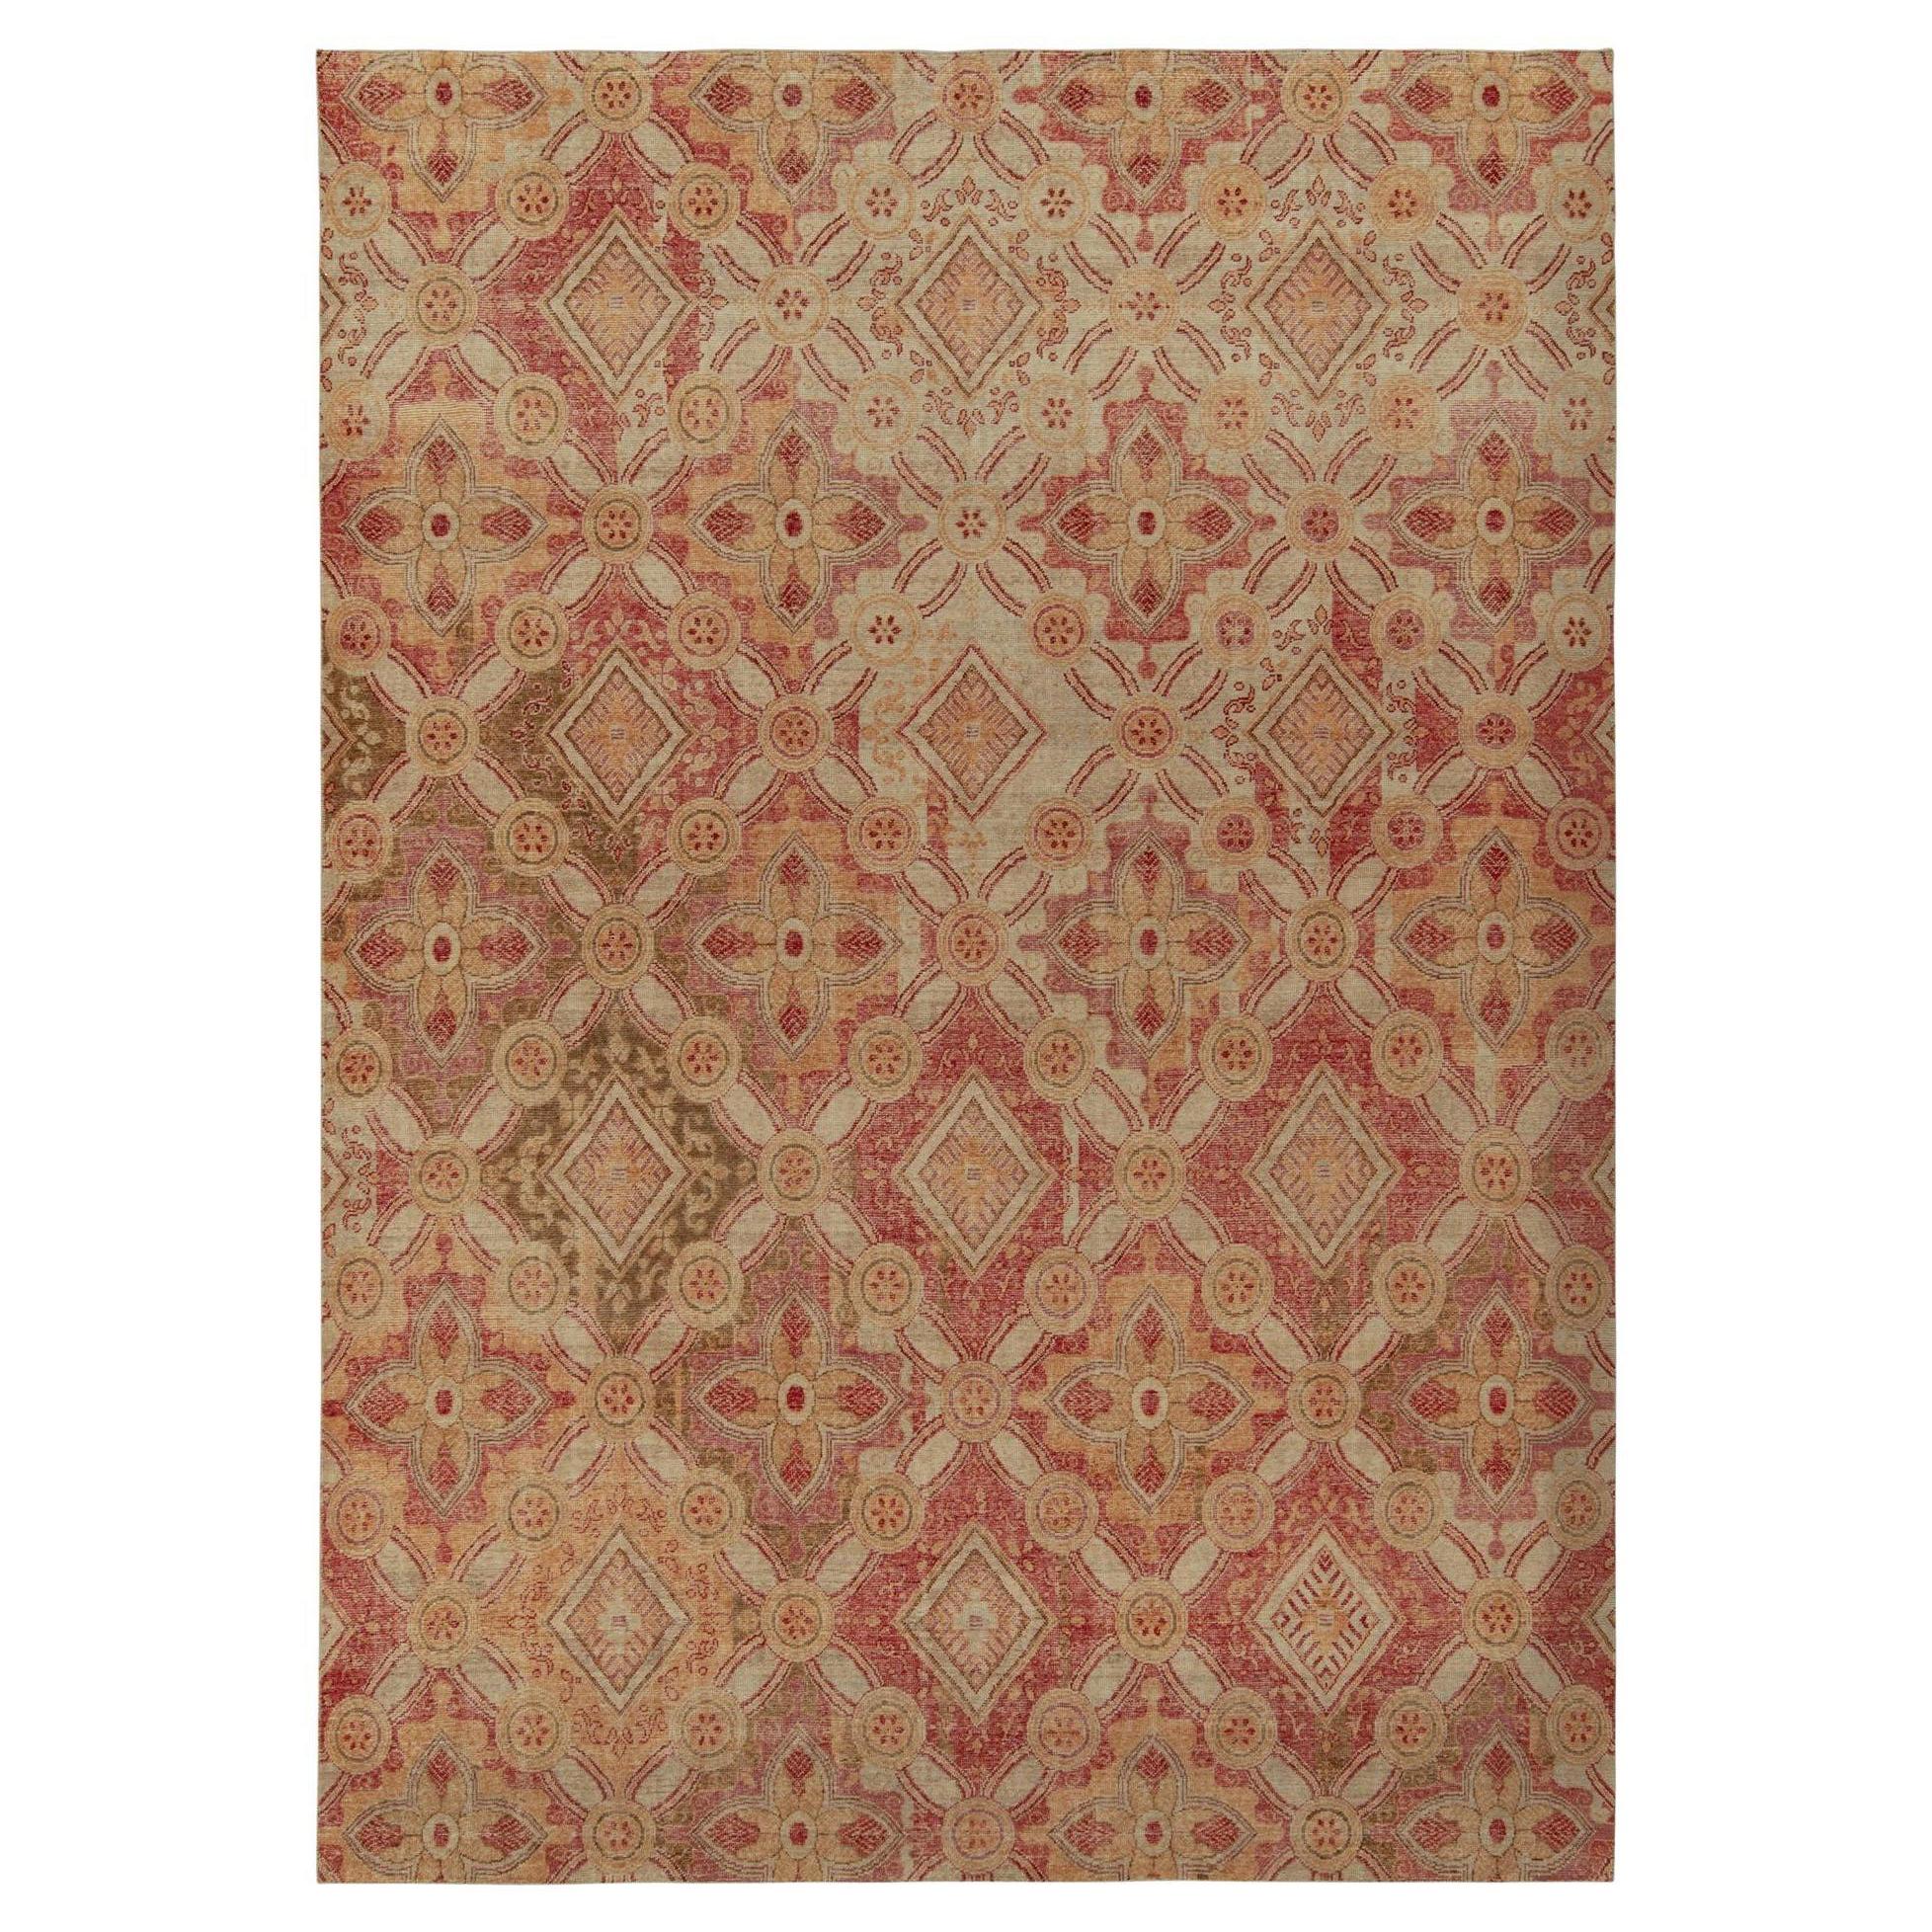 Rug & Kilim's Distressed Style Rug in Red, Gold and Beige-Brown Trellises (tapis de style vieilli en rouge, or et beige)